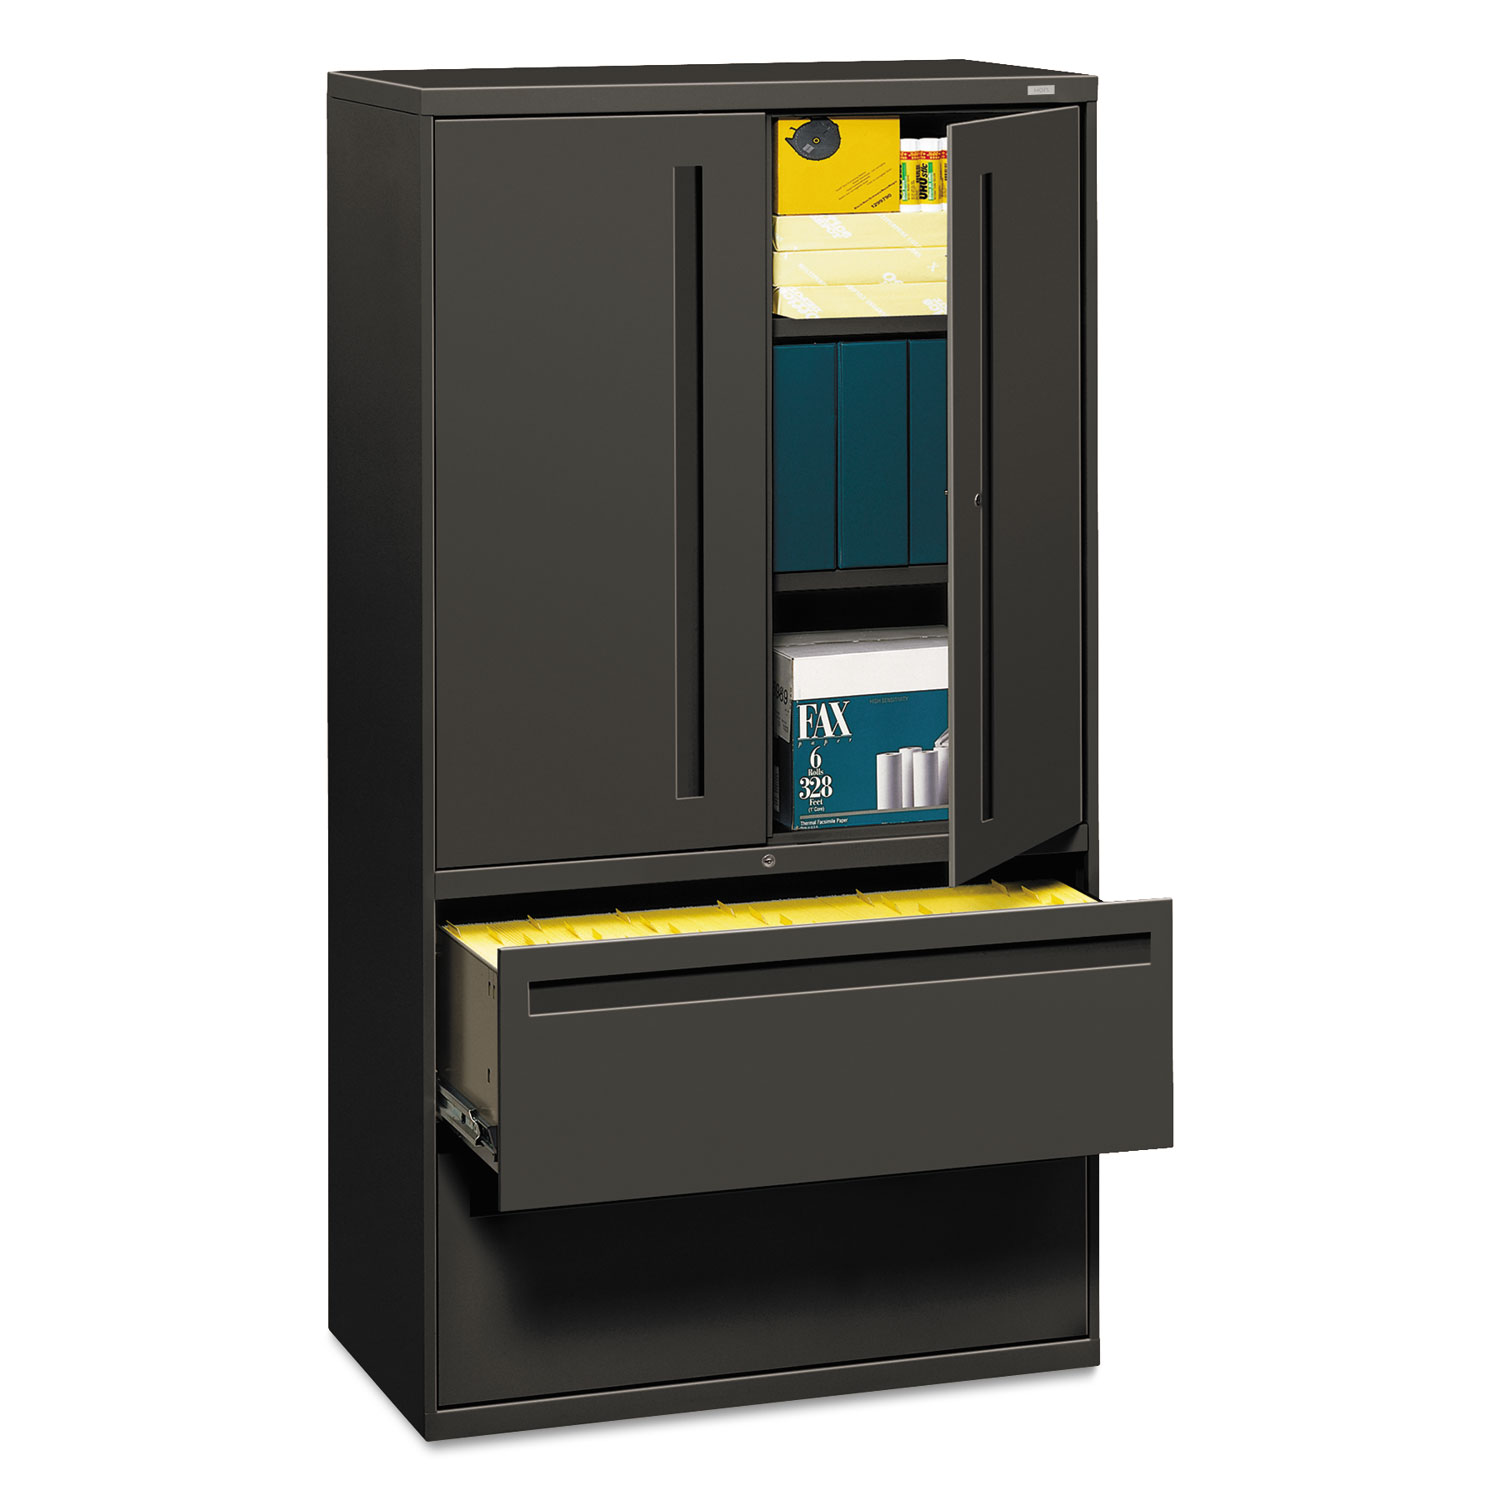  HON H785LS.L.S 700 Series Lateral File with Storage Cabinet, 36w x 18d x 64.25h, Charcoal (HON785LSS) 